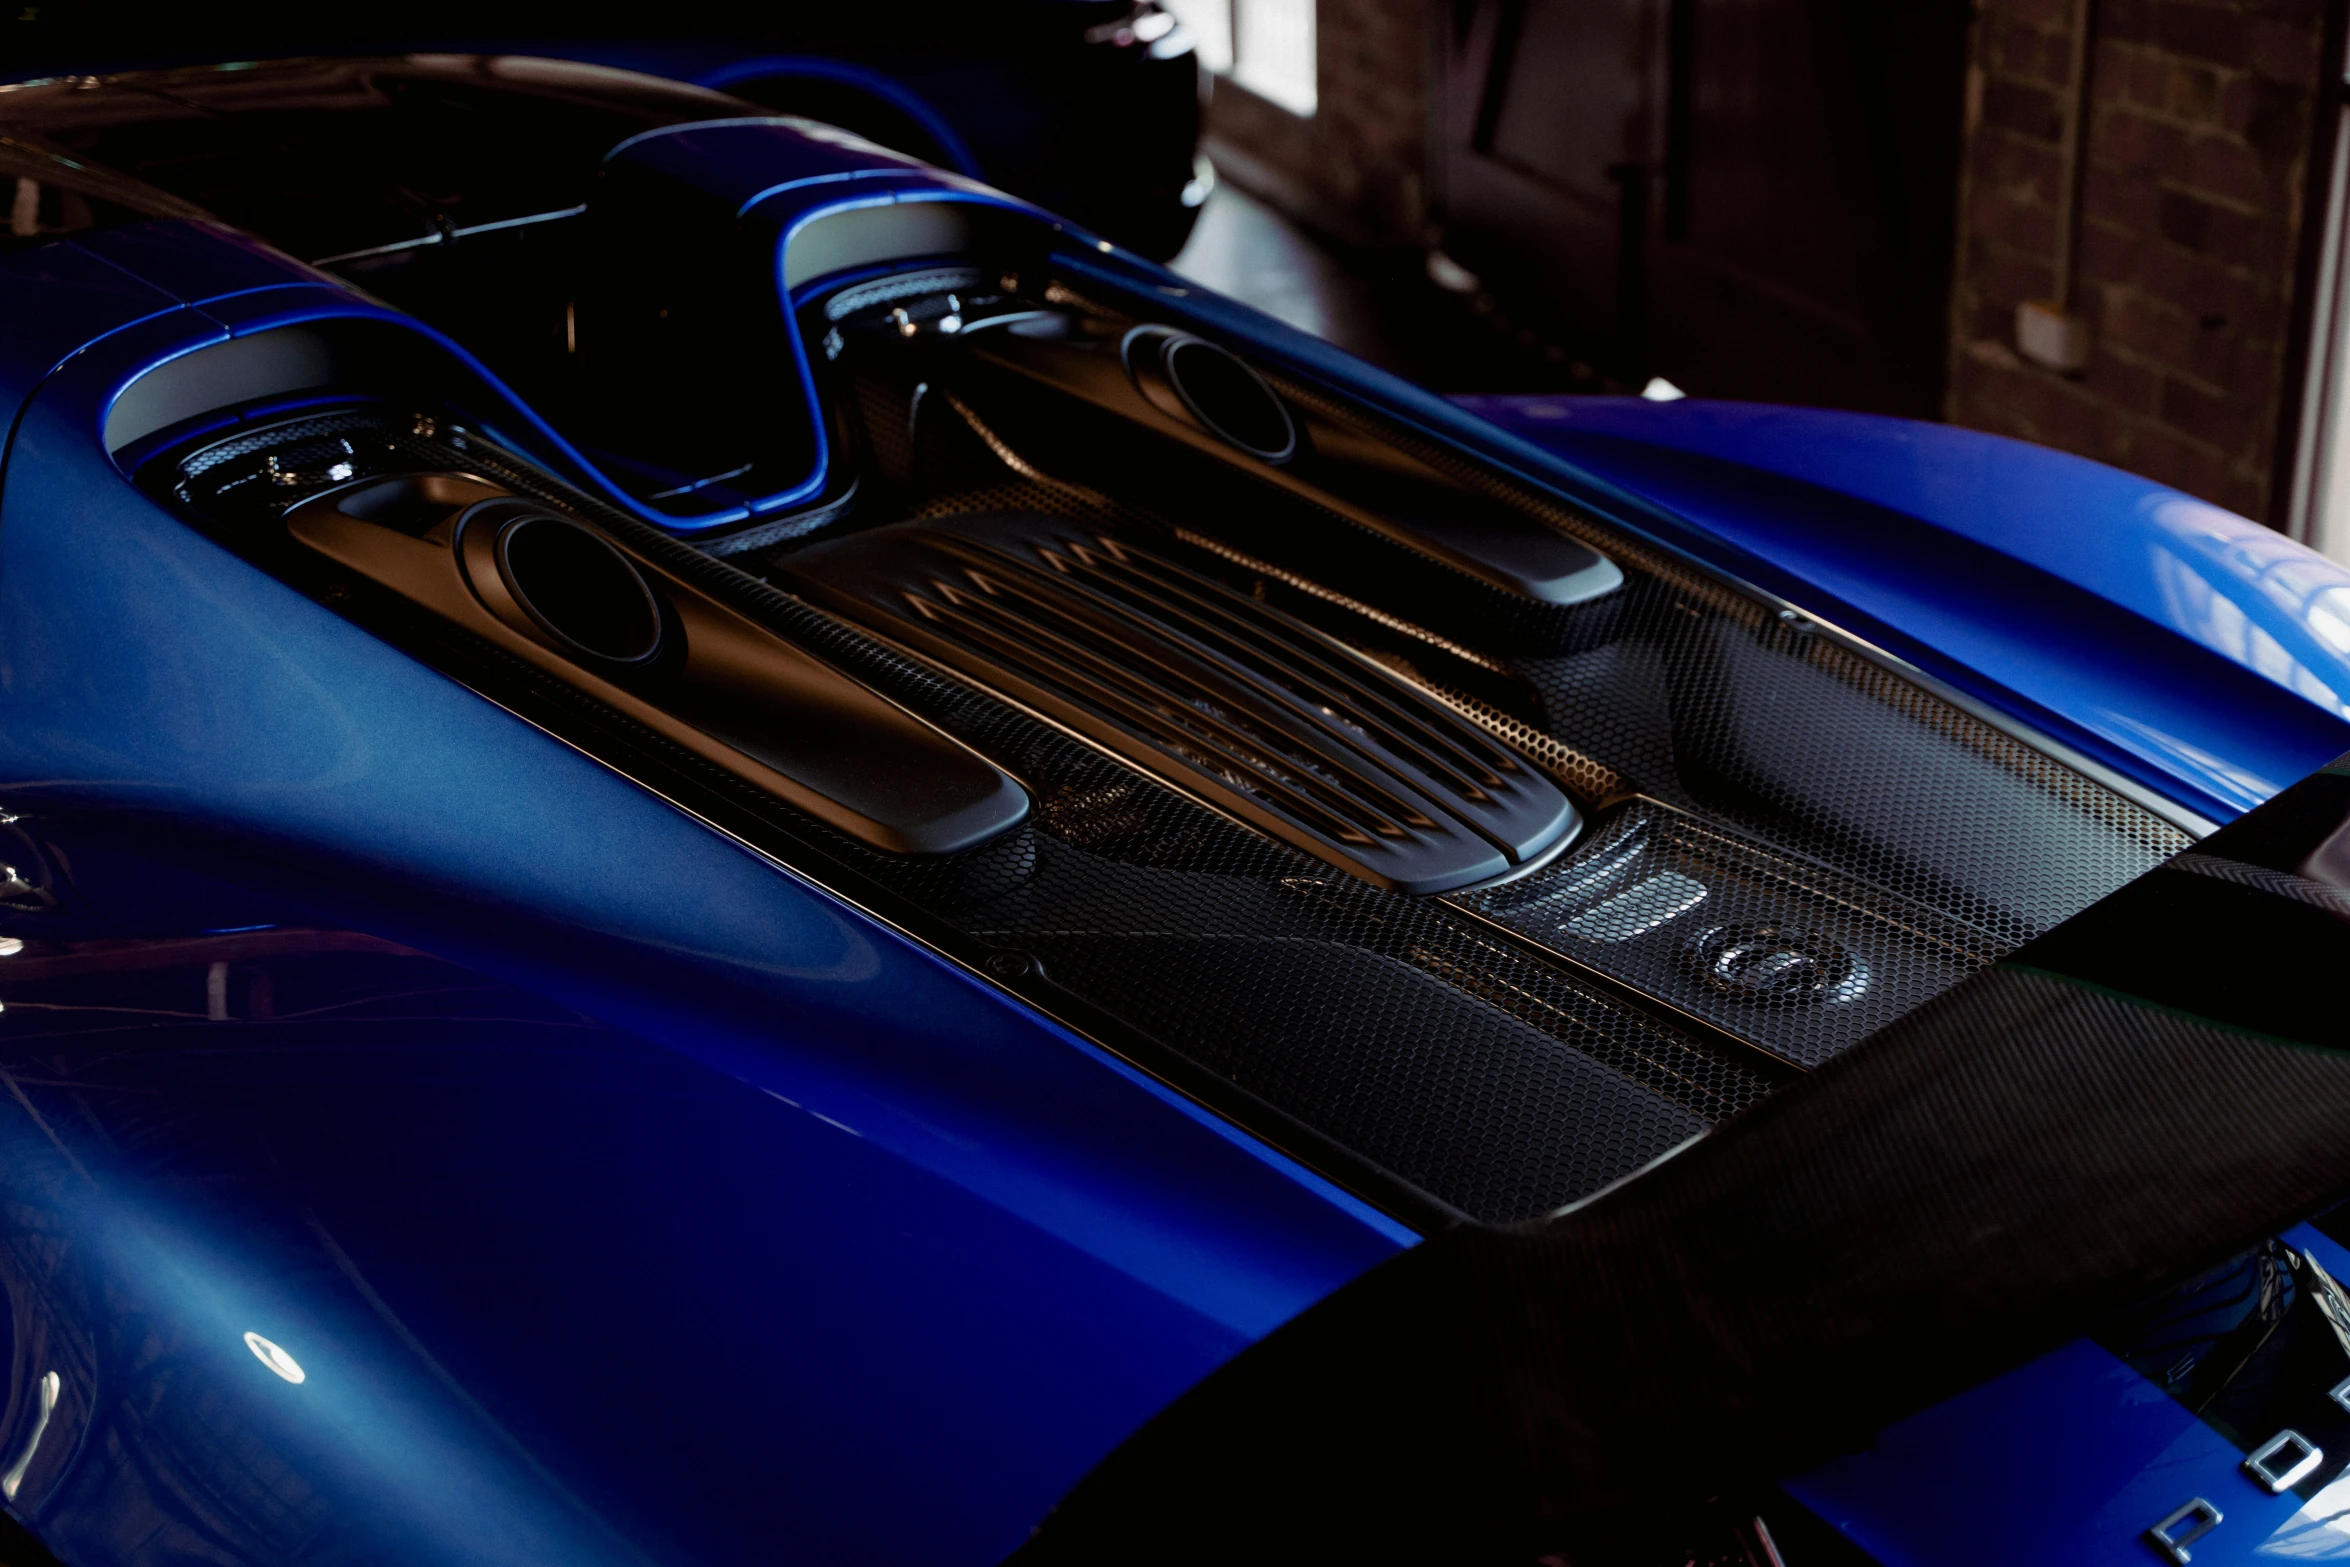 the engine compartment of a blue sports car